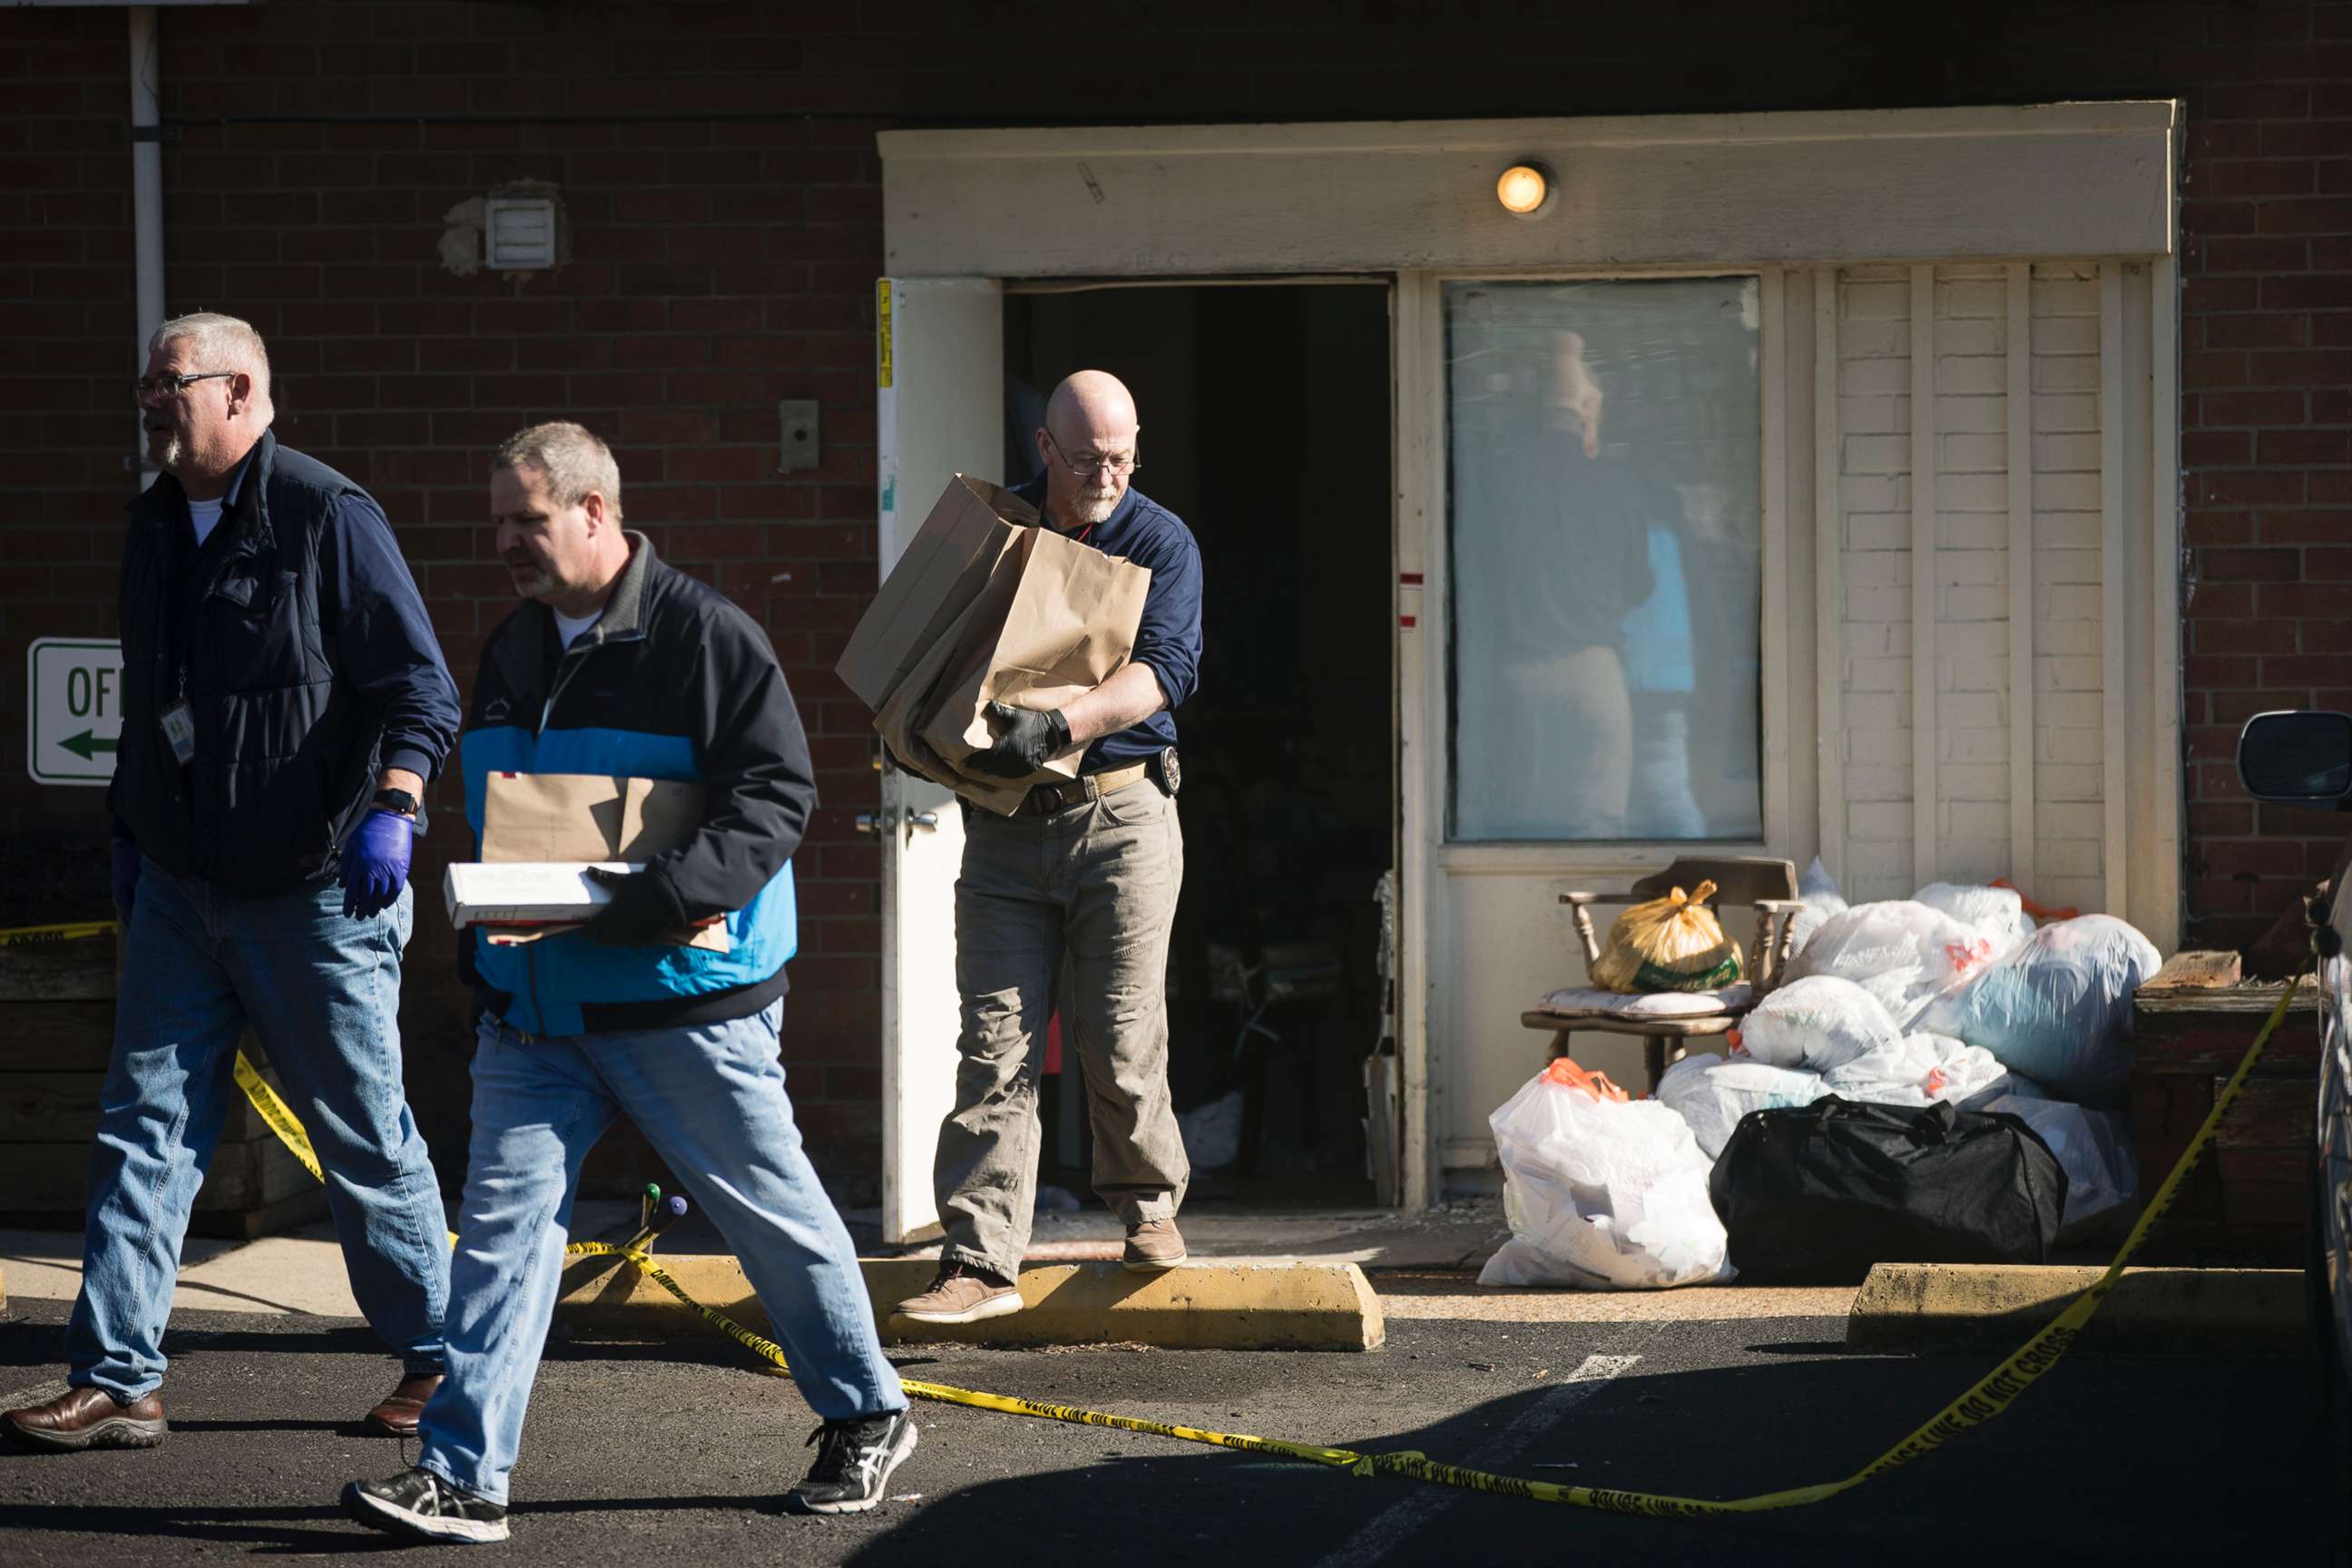 PHOTO: Investigators carry out items from the Robert Morris Apartments in Morrisville, Pa., Feb. 26, 2019.